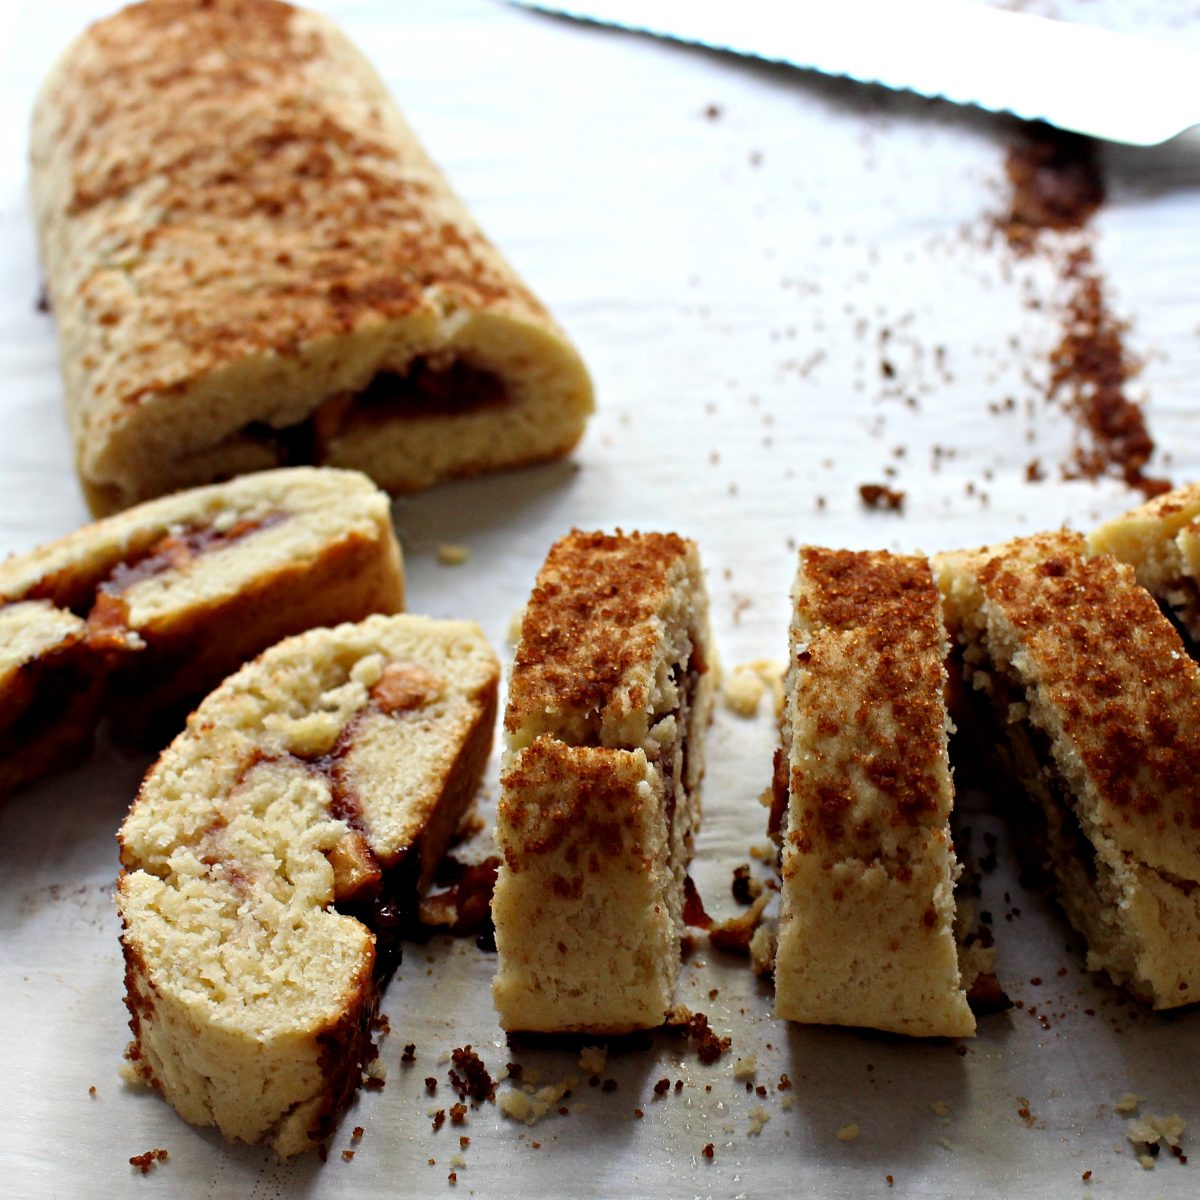 Baked dough log sliced into cookies.